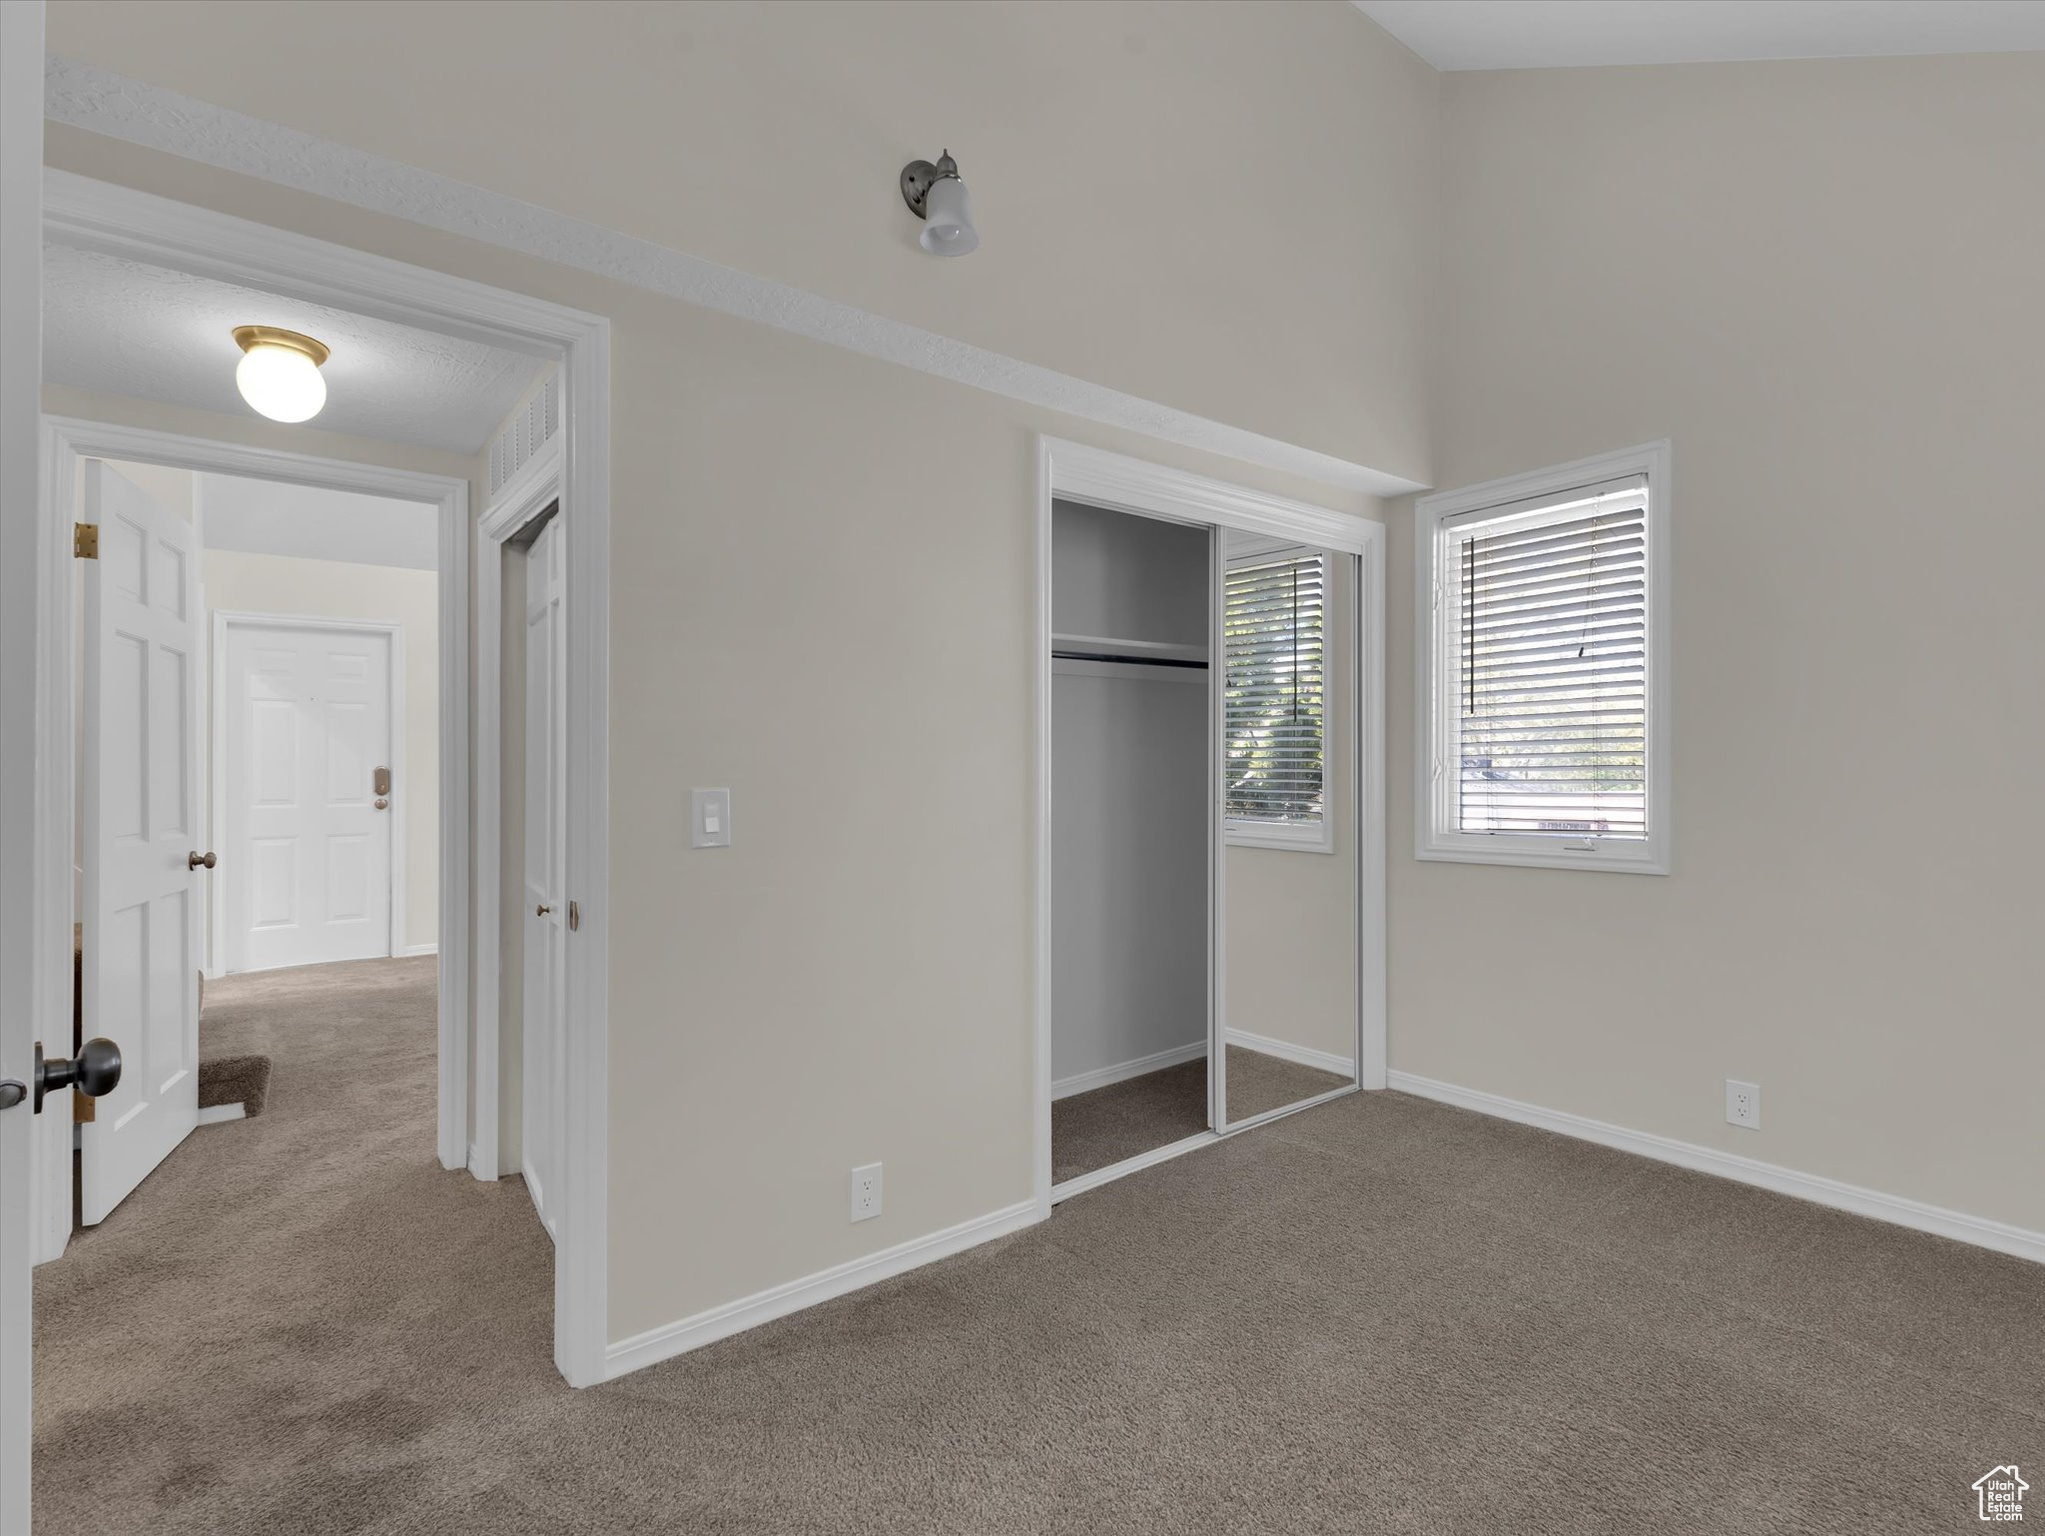 Unfurnished bedroom featuring a closet and carpet floors